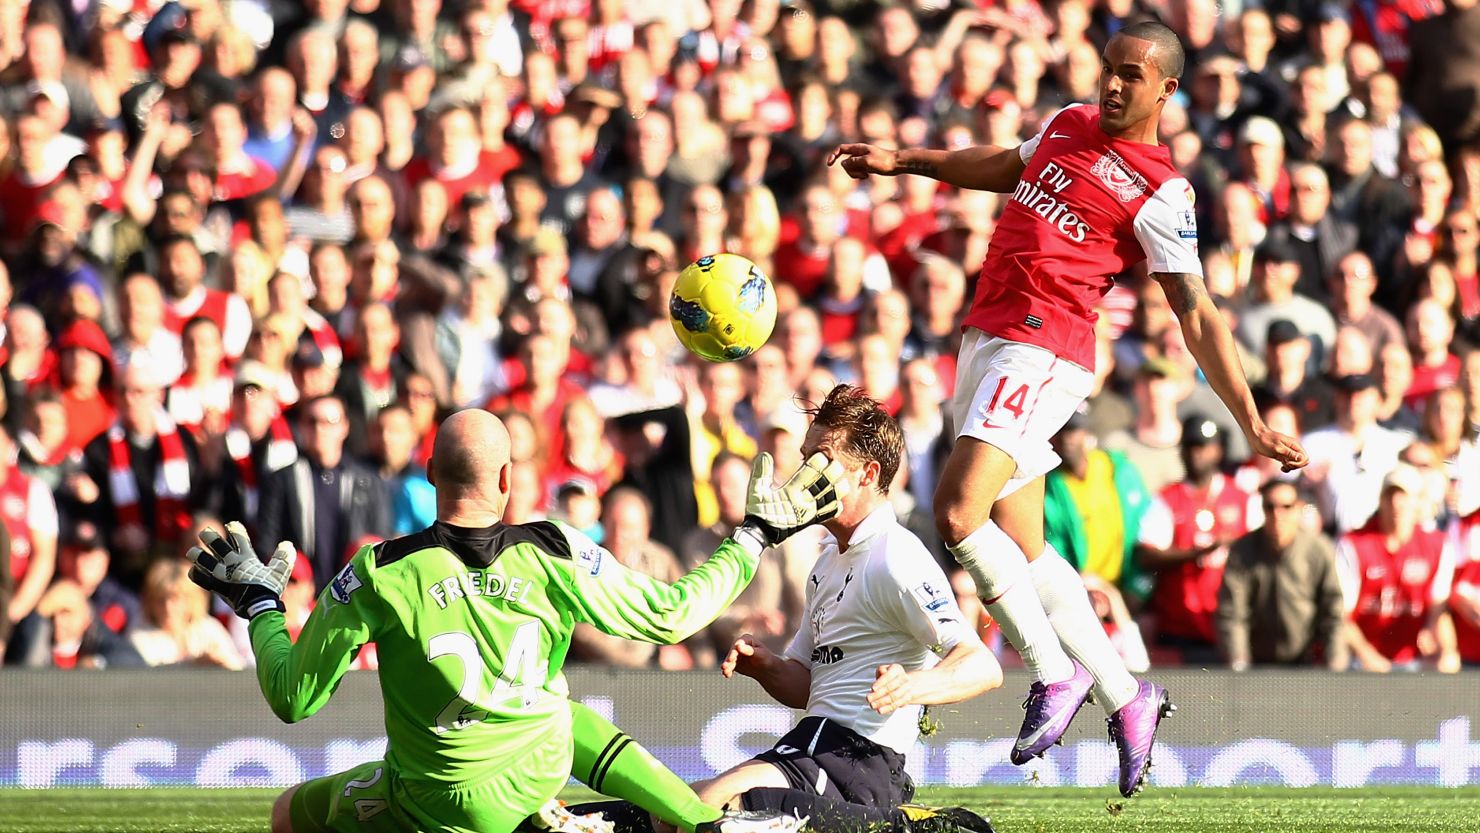 Theo Walcott scores the first of his two goals in Arsenal's 5-2 thrashing of Tottenham in the north London derby.